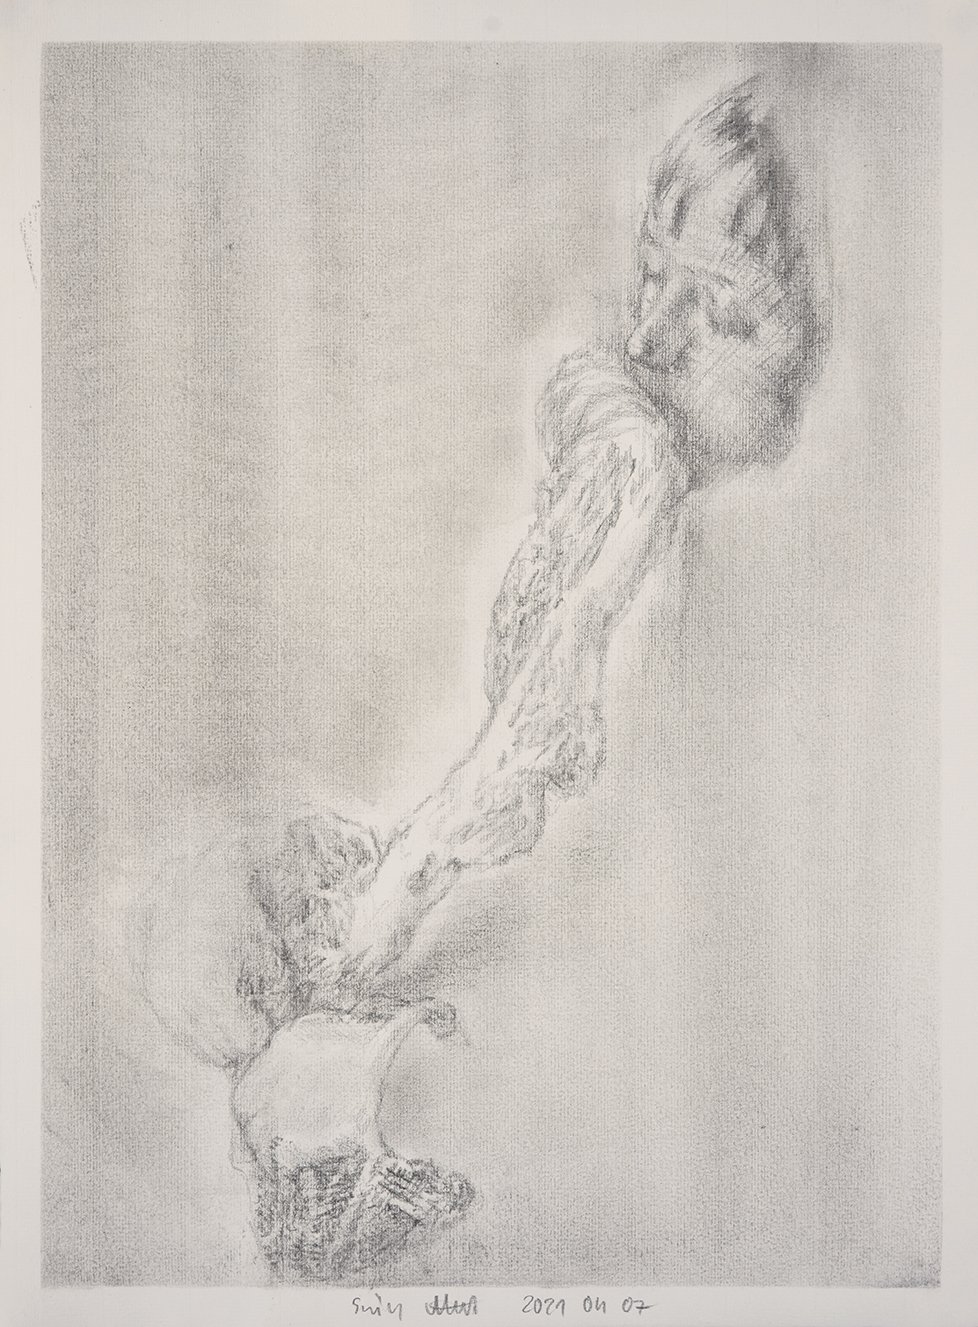 Drawing, graphite on paper, 40x30cm 2021 04 07